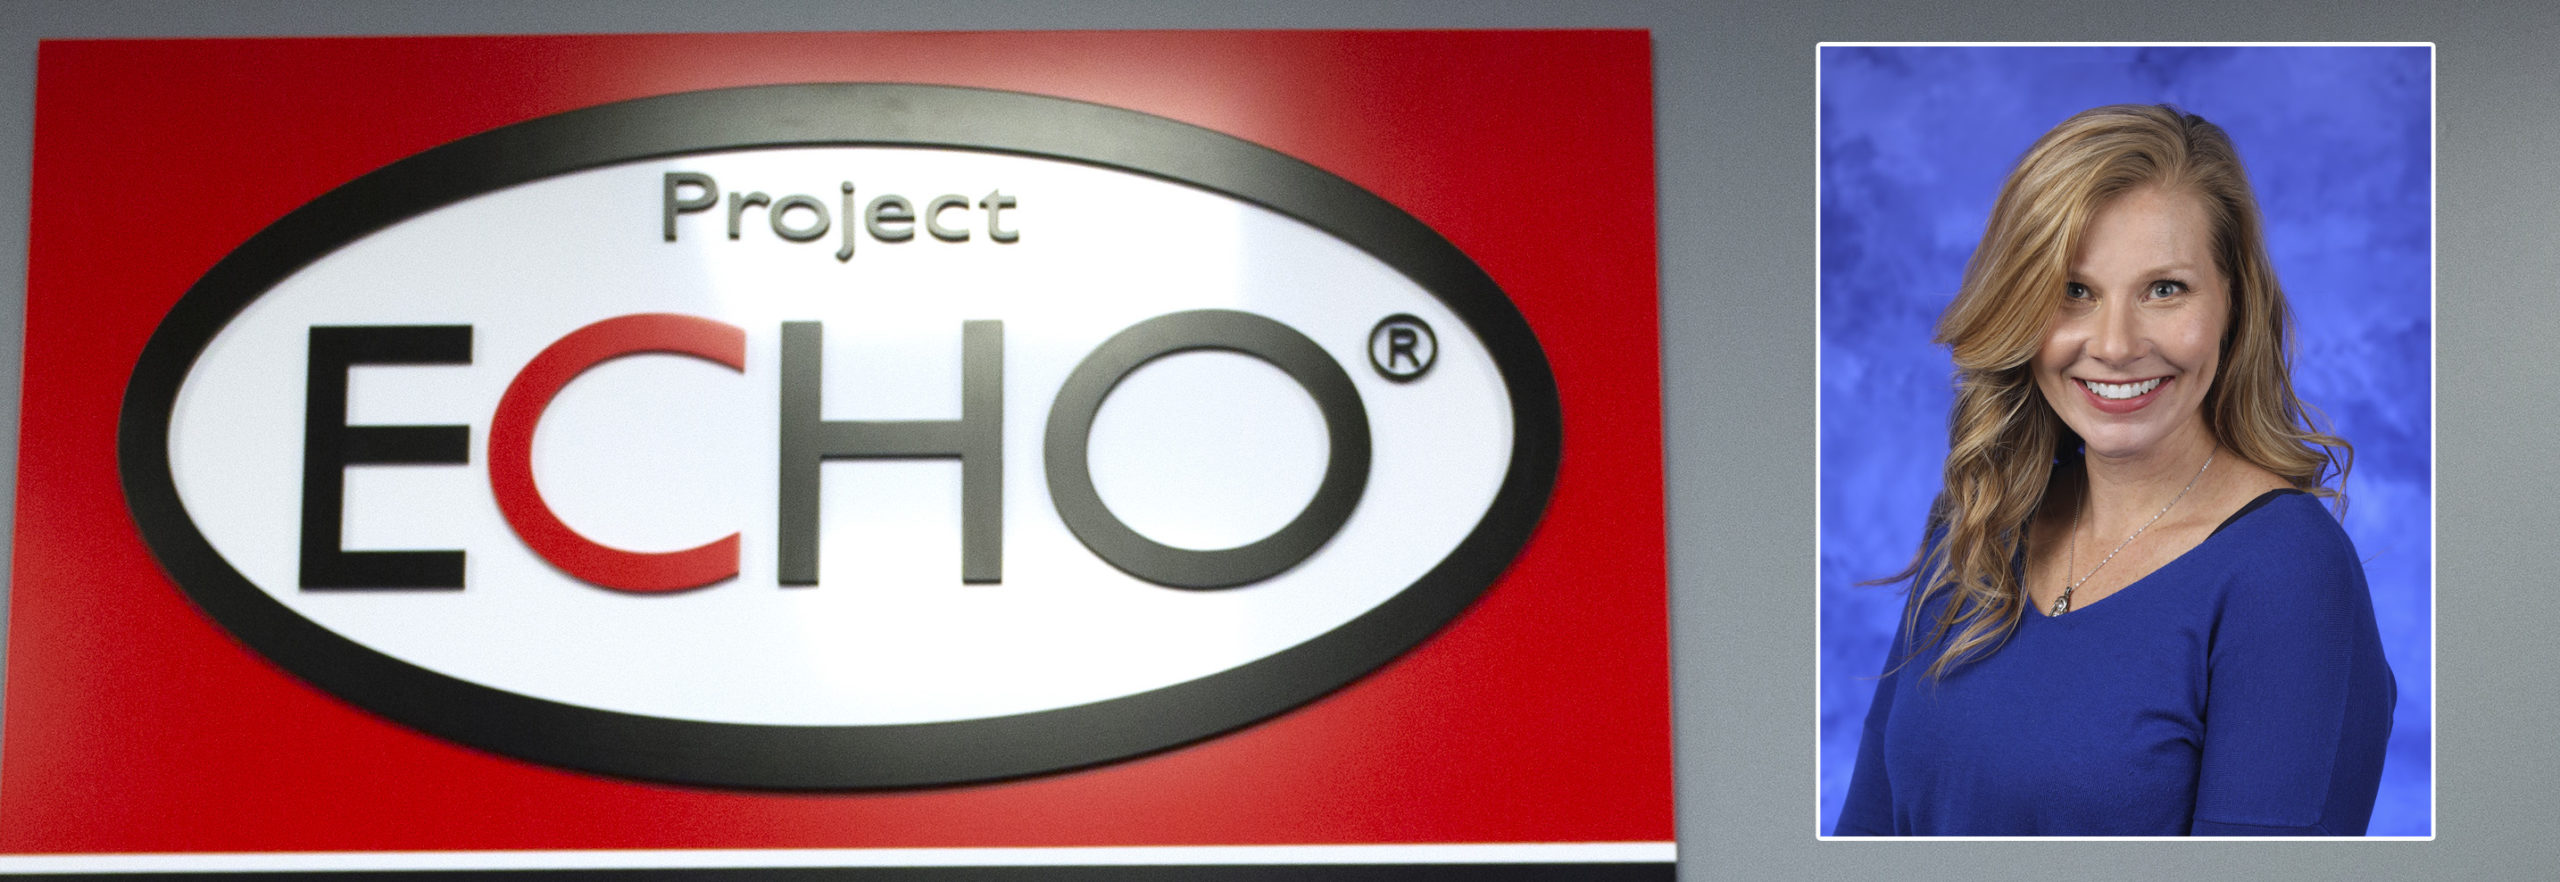 Project ECHO logo with a professional portrait of Jessica Beiler